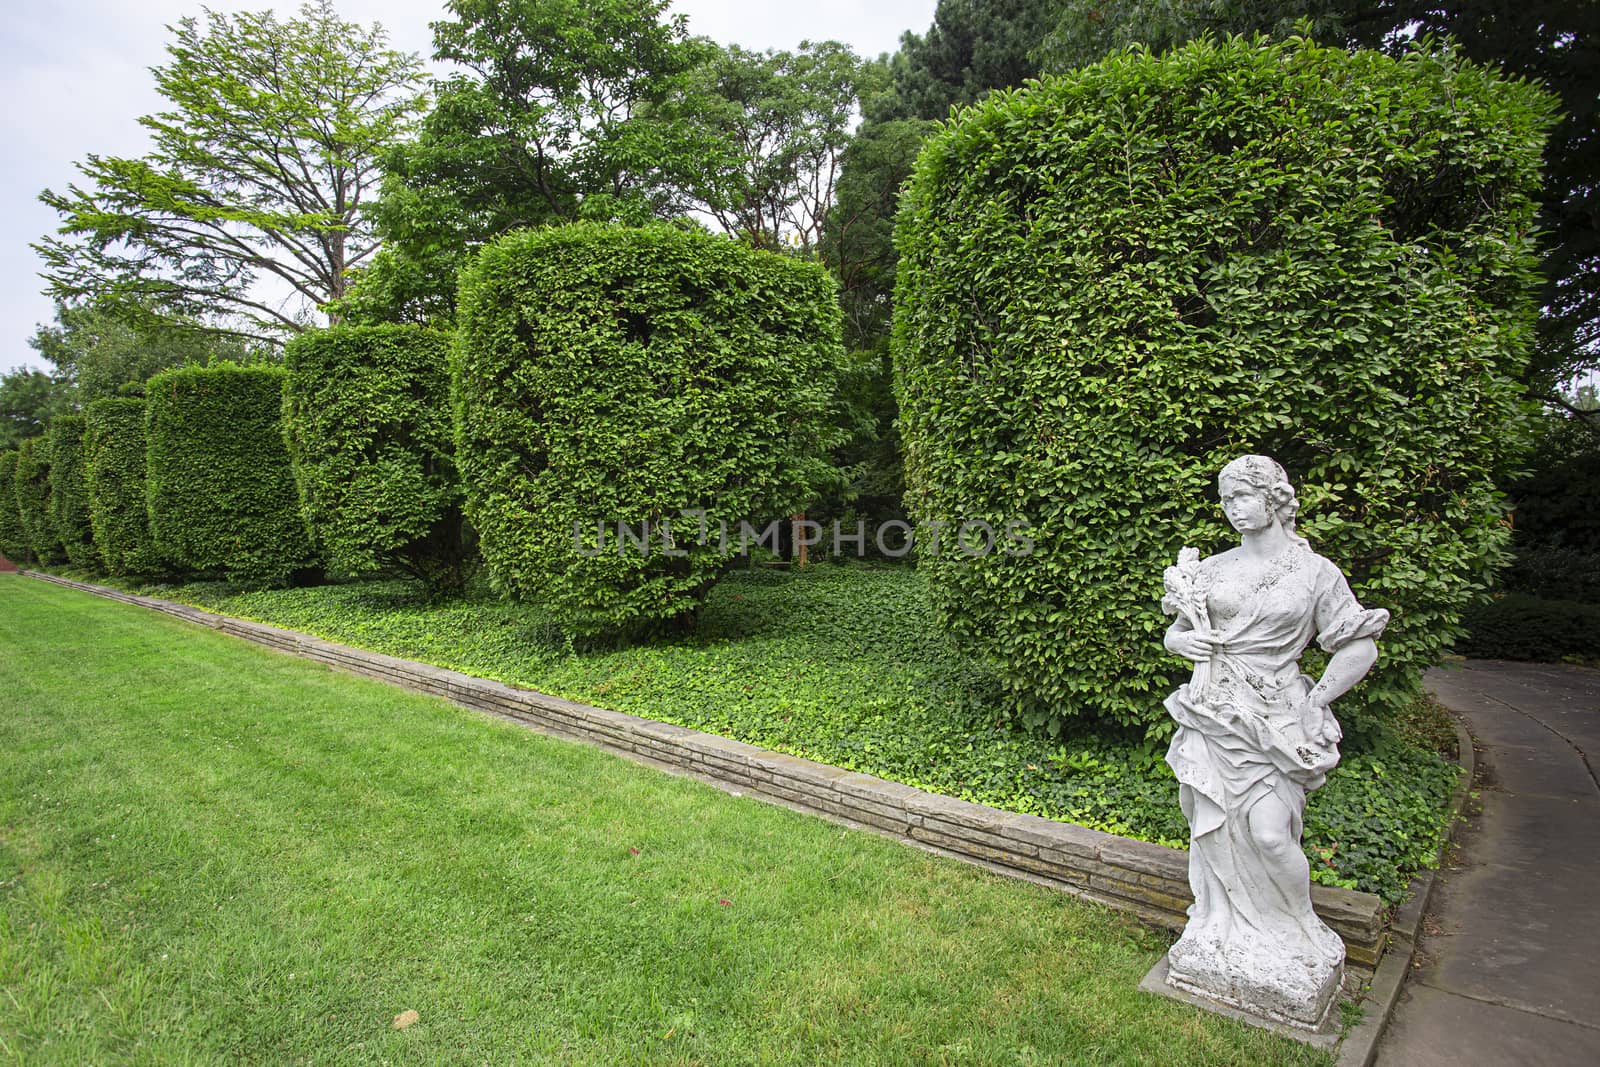 Formal garden with trimmed hedge and a marble statue of woman